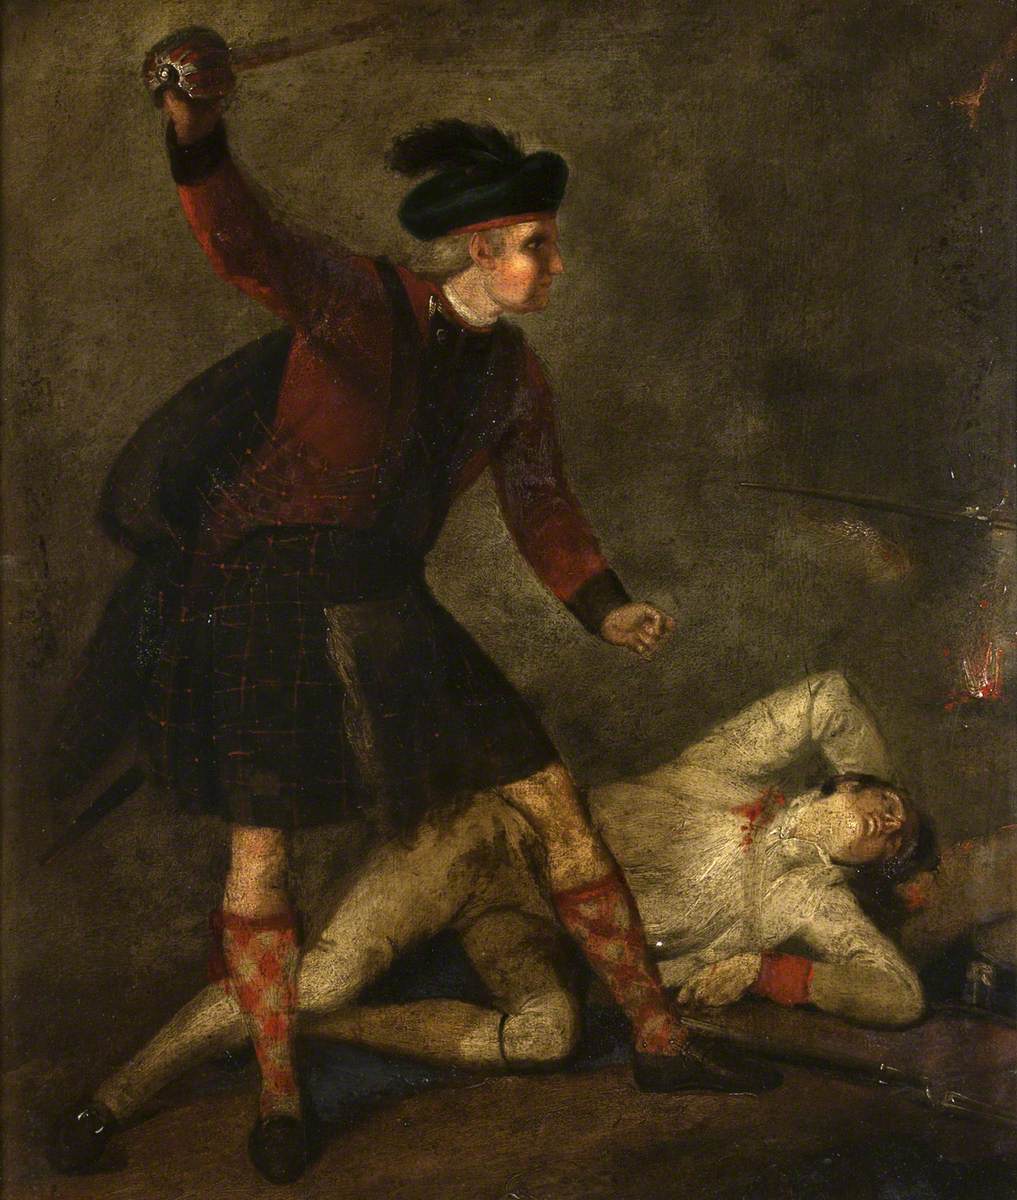 Rob Roy Slaying an Opponent